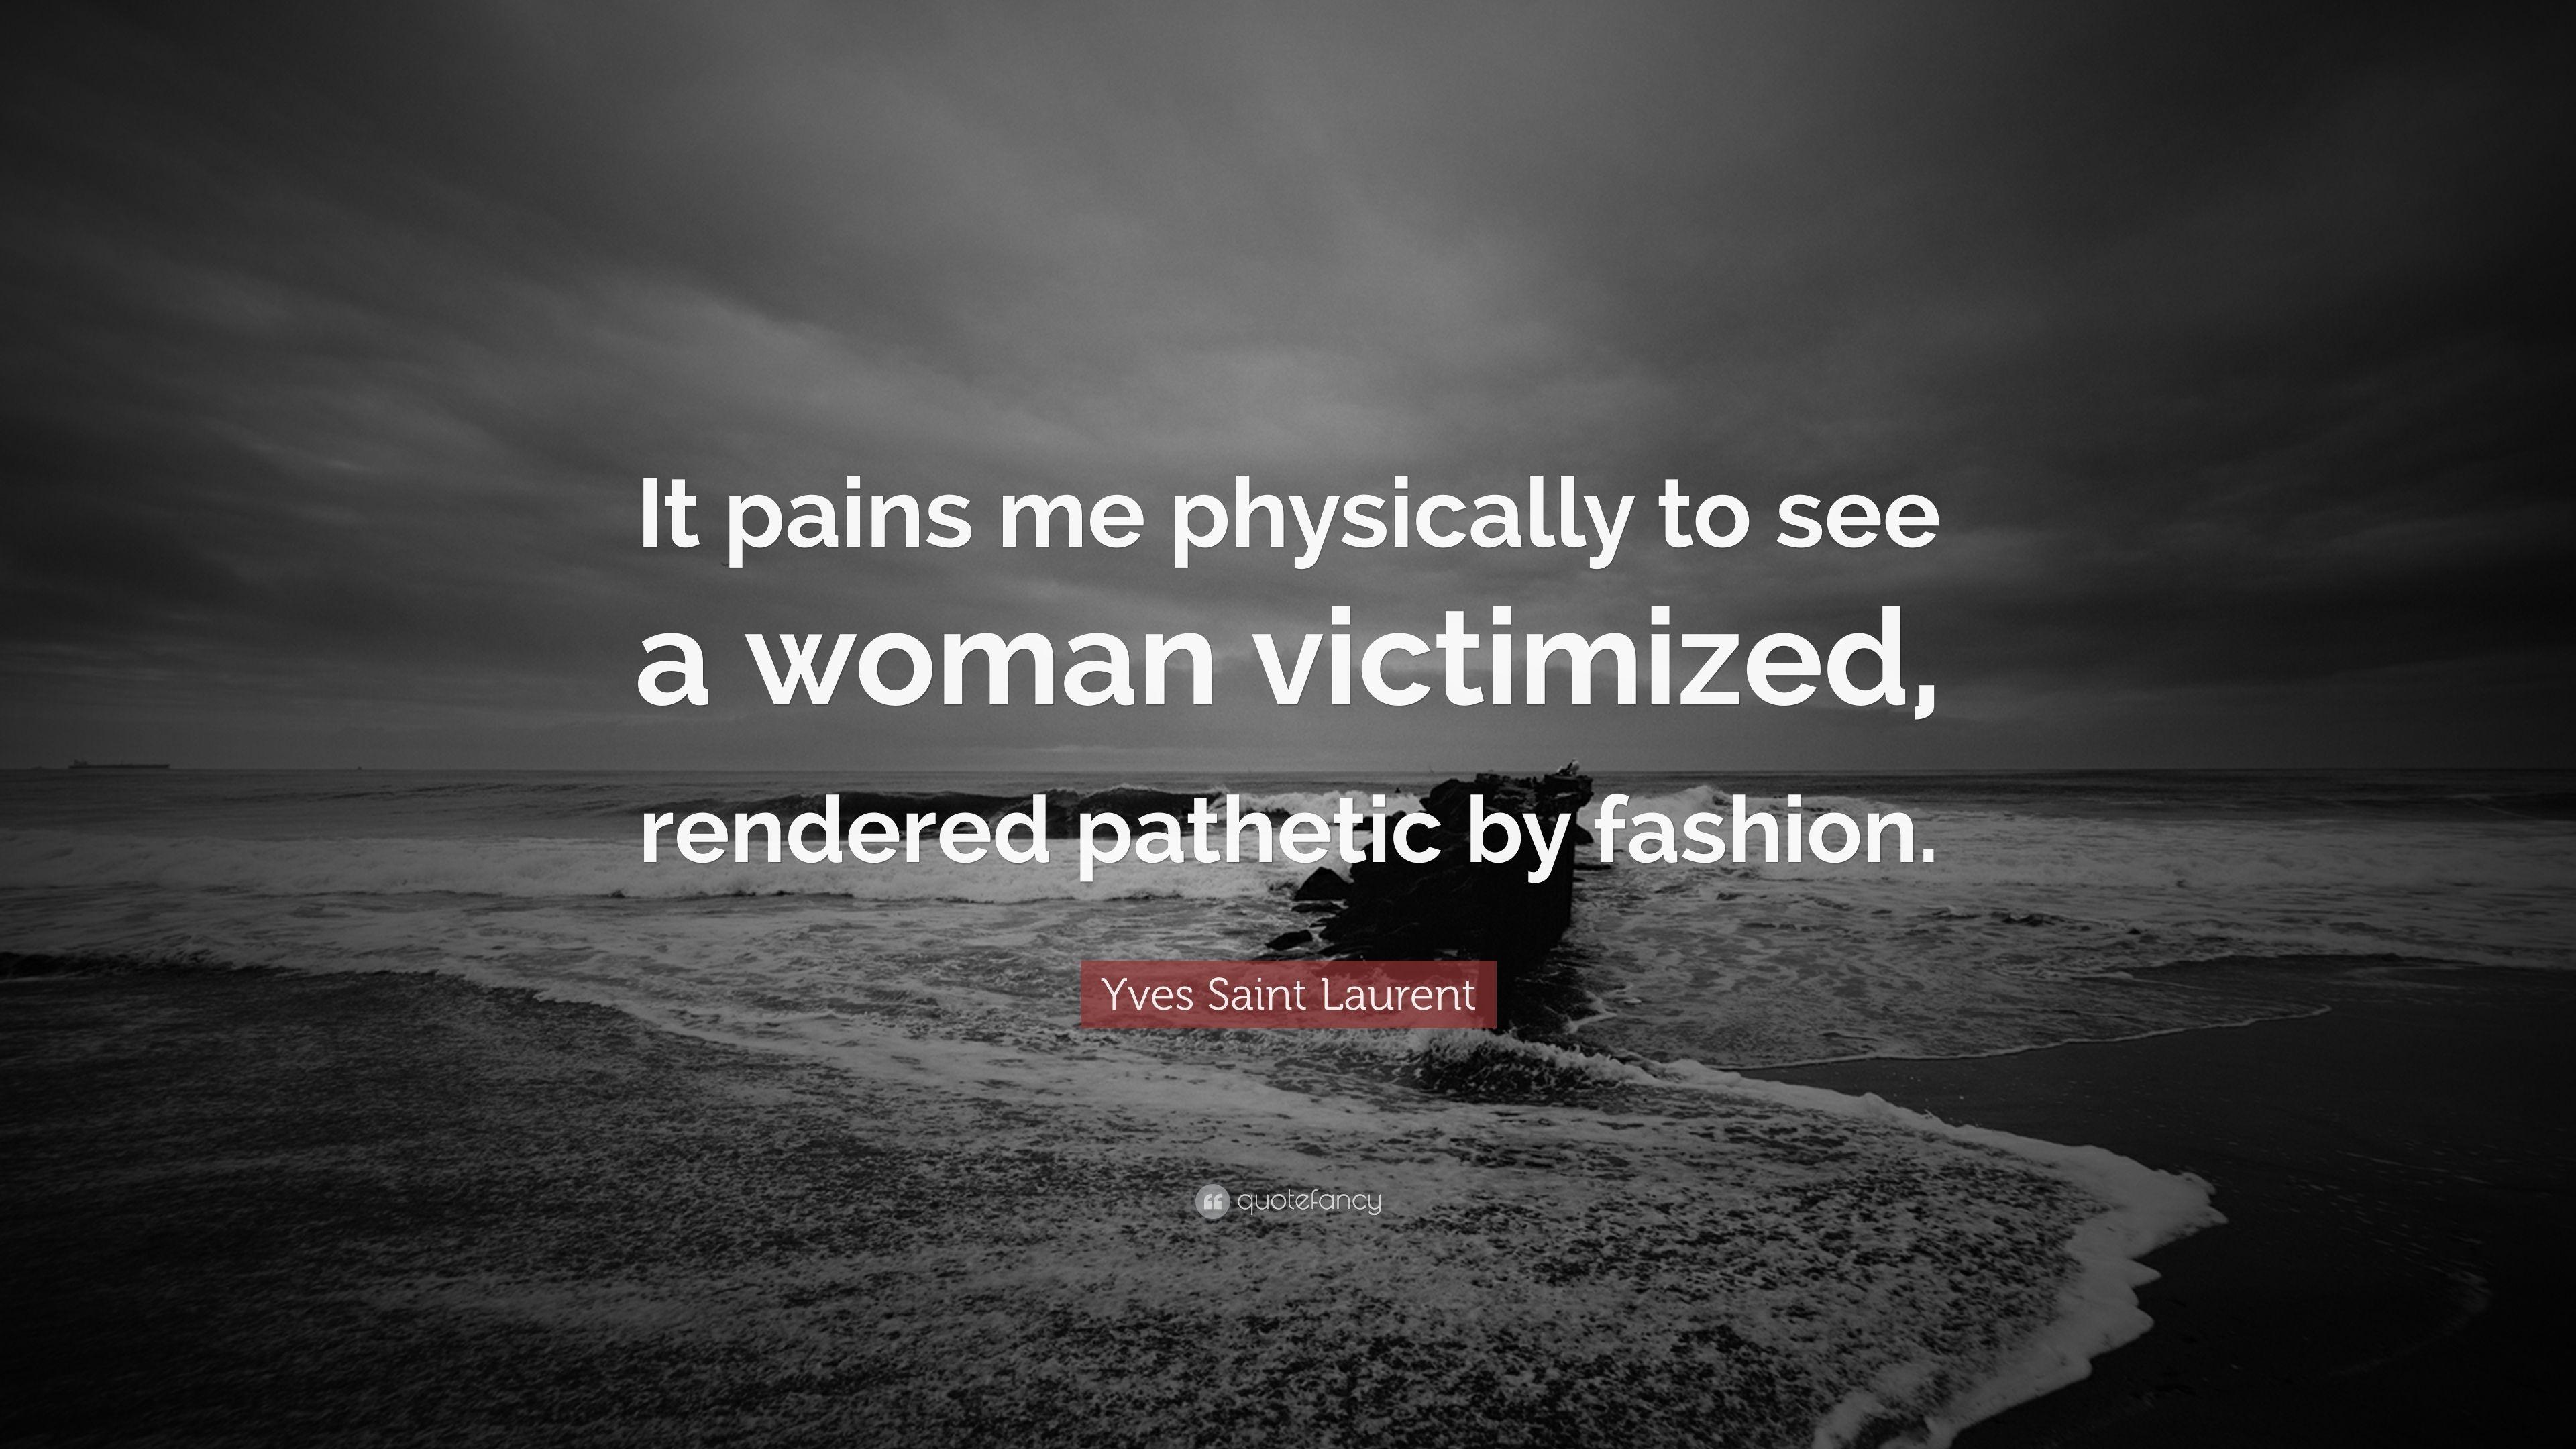 Yves Saint Laurent Quote: “It pains me physically to see a woman